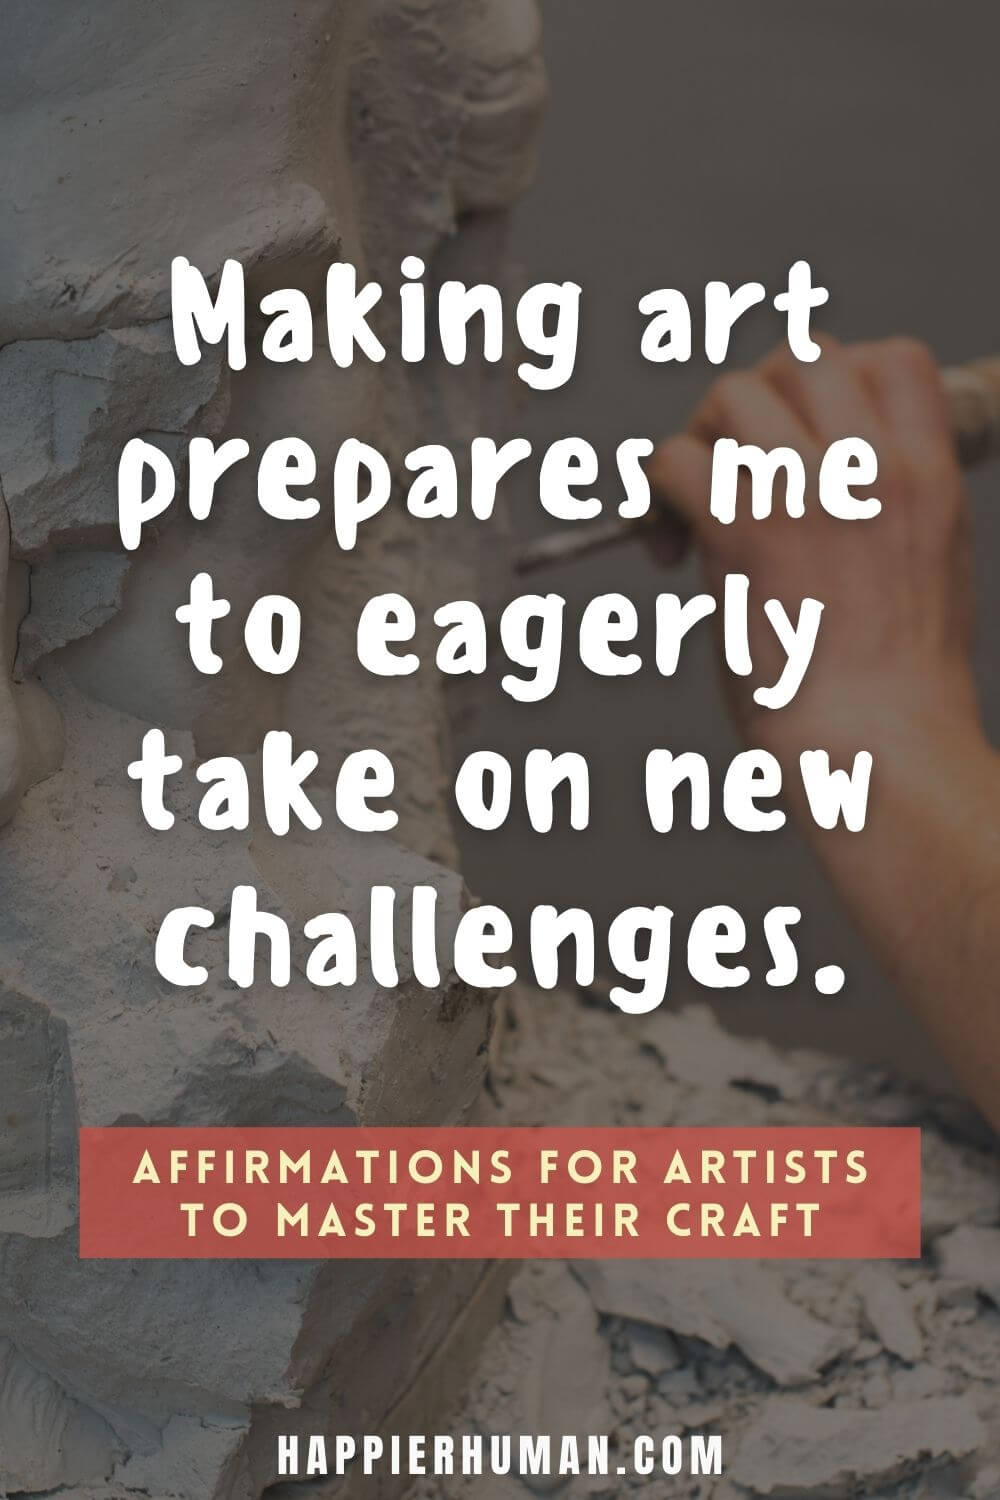 Affirmations for Artists - Making art prepares me to eagerly take on new challenges. | talent affirmations | affirmations for imagination | positive affirmations